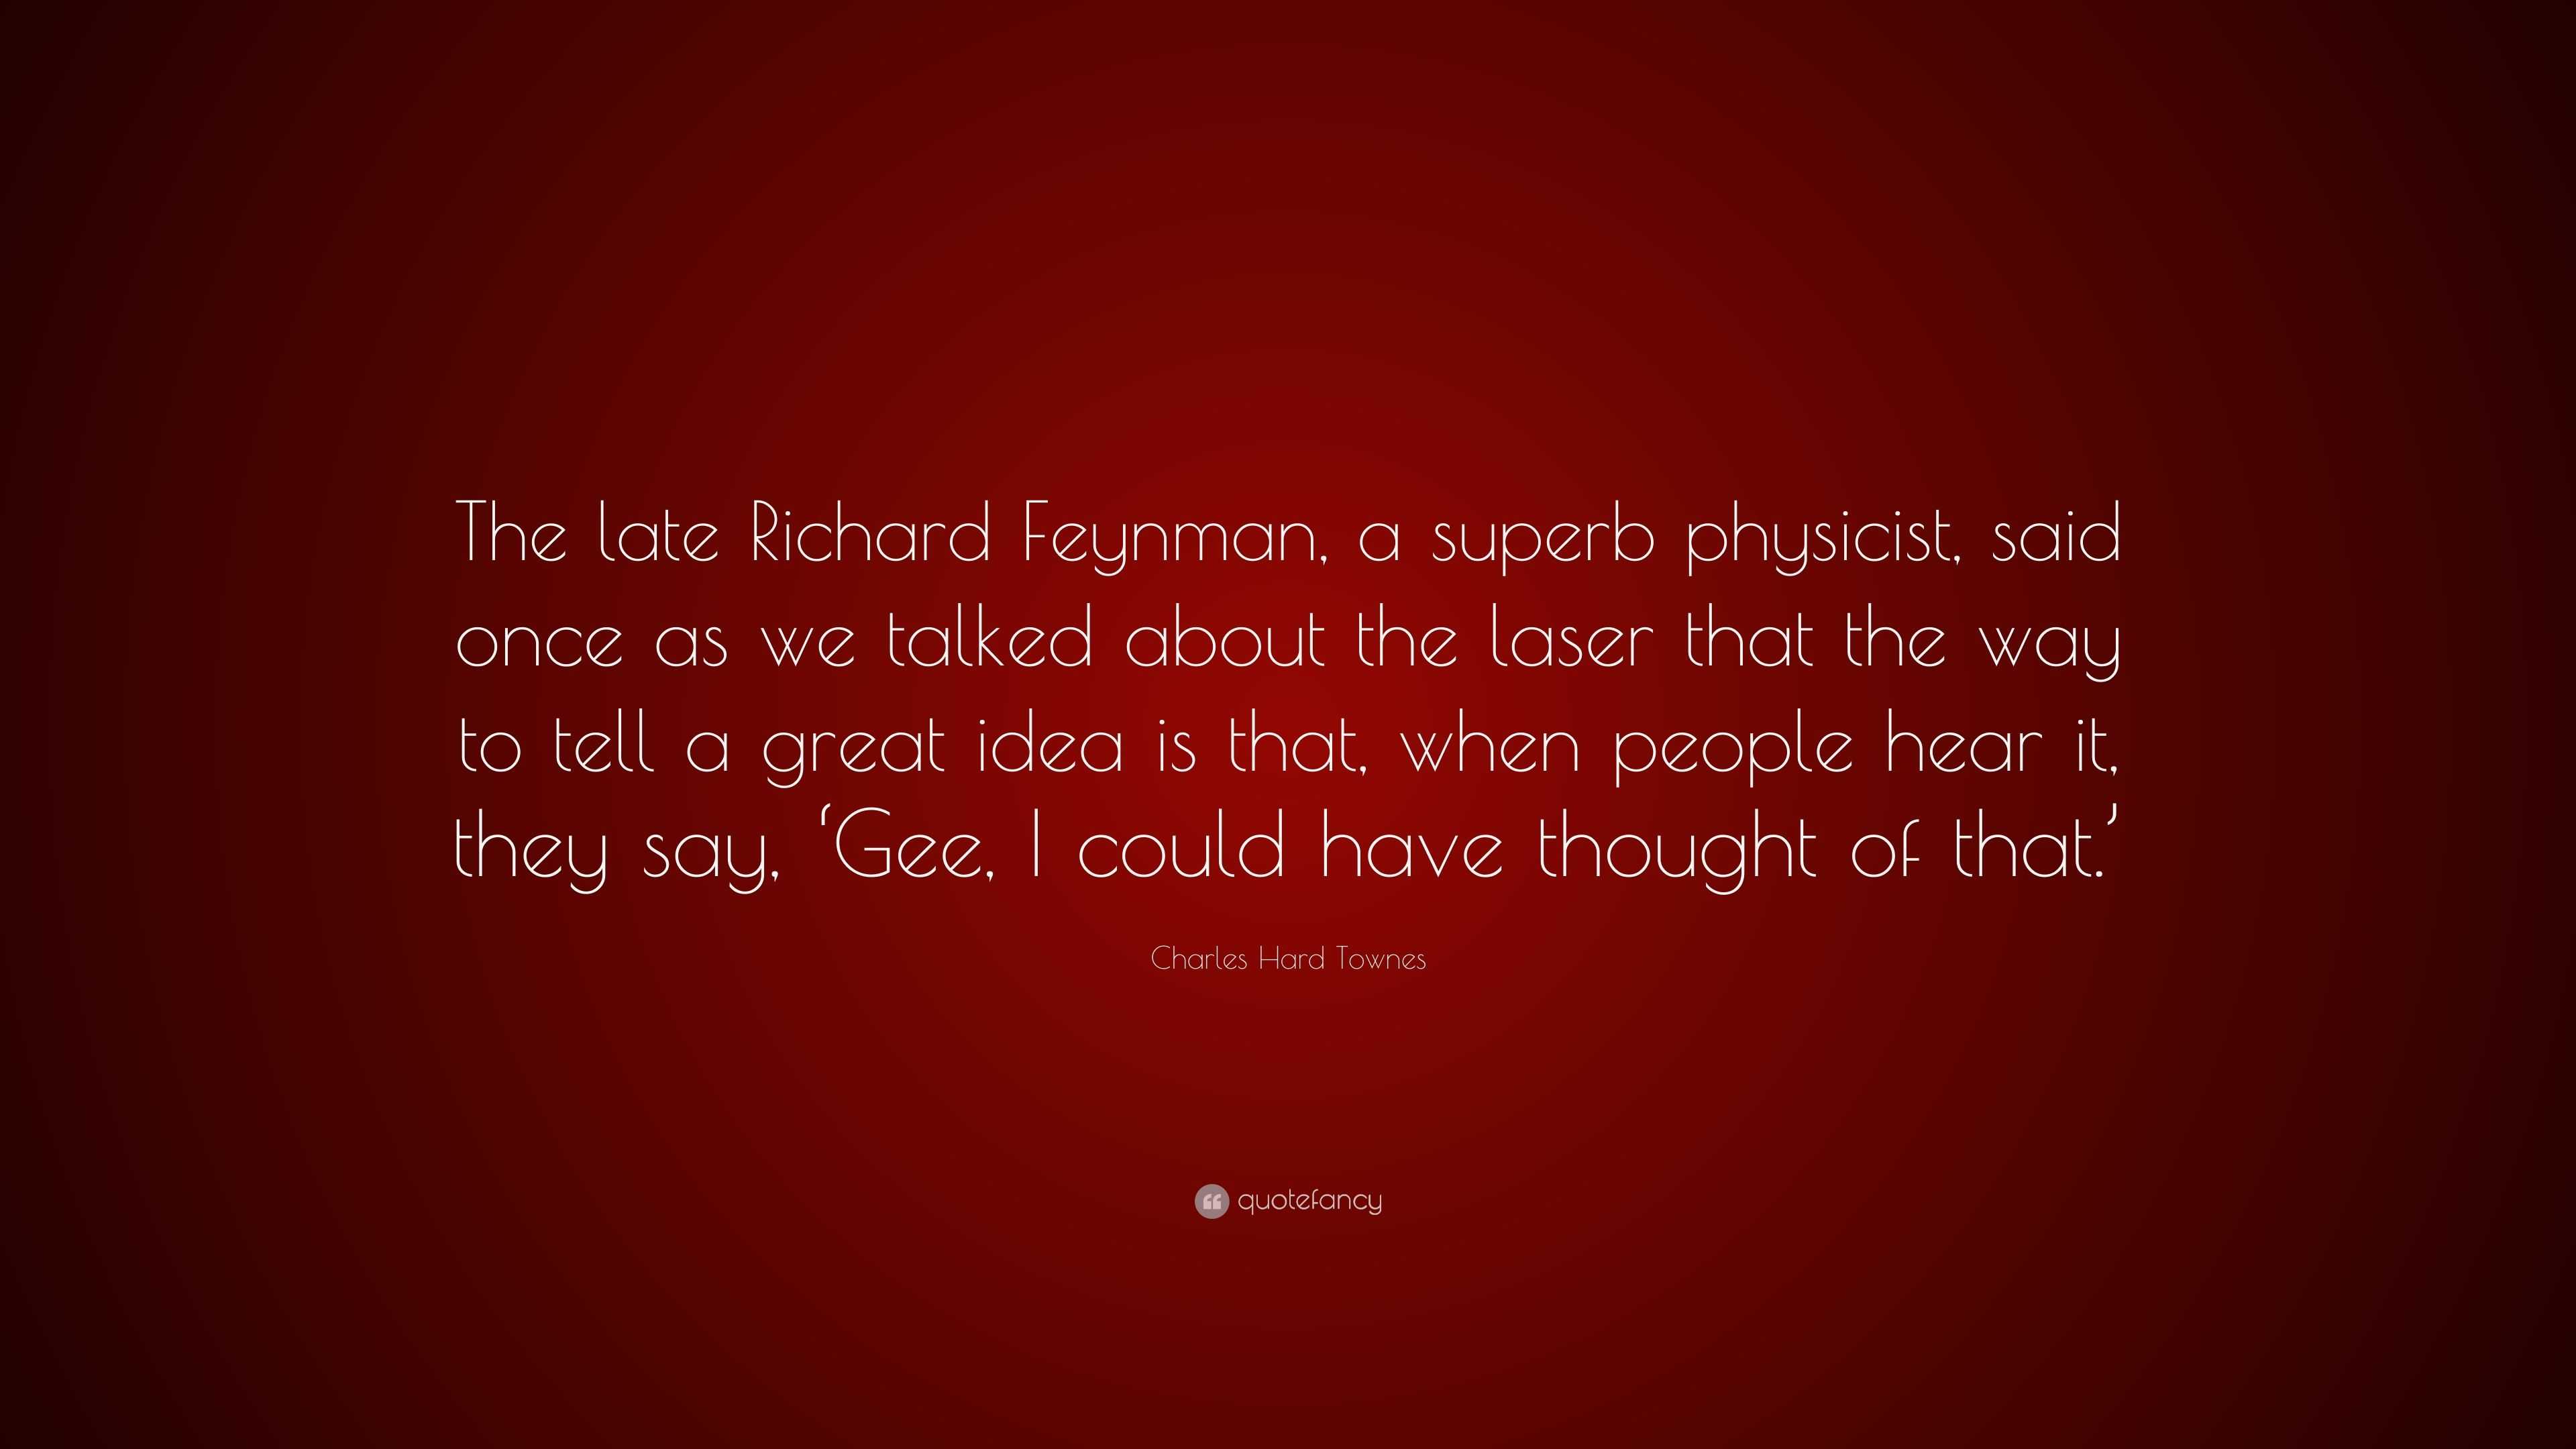 Charles Hard Townes Quote: “The late Richard Feynman, a superb ...